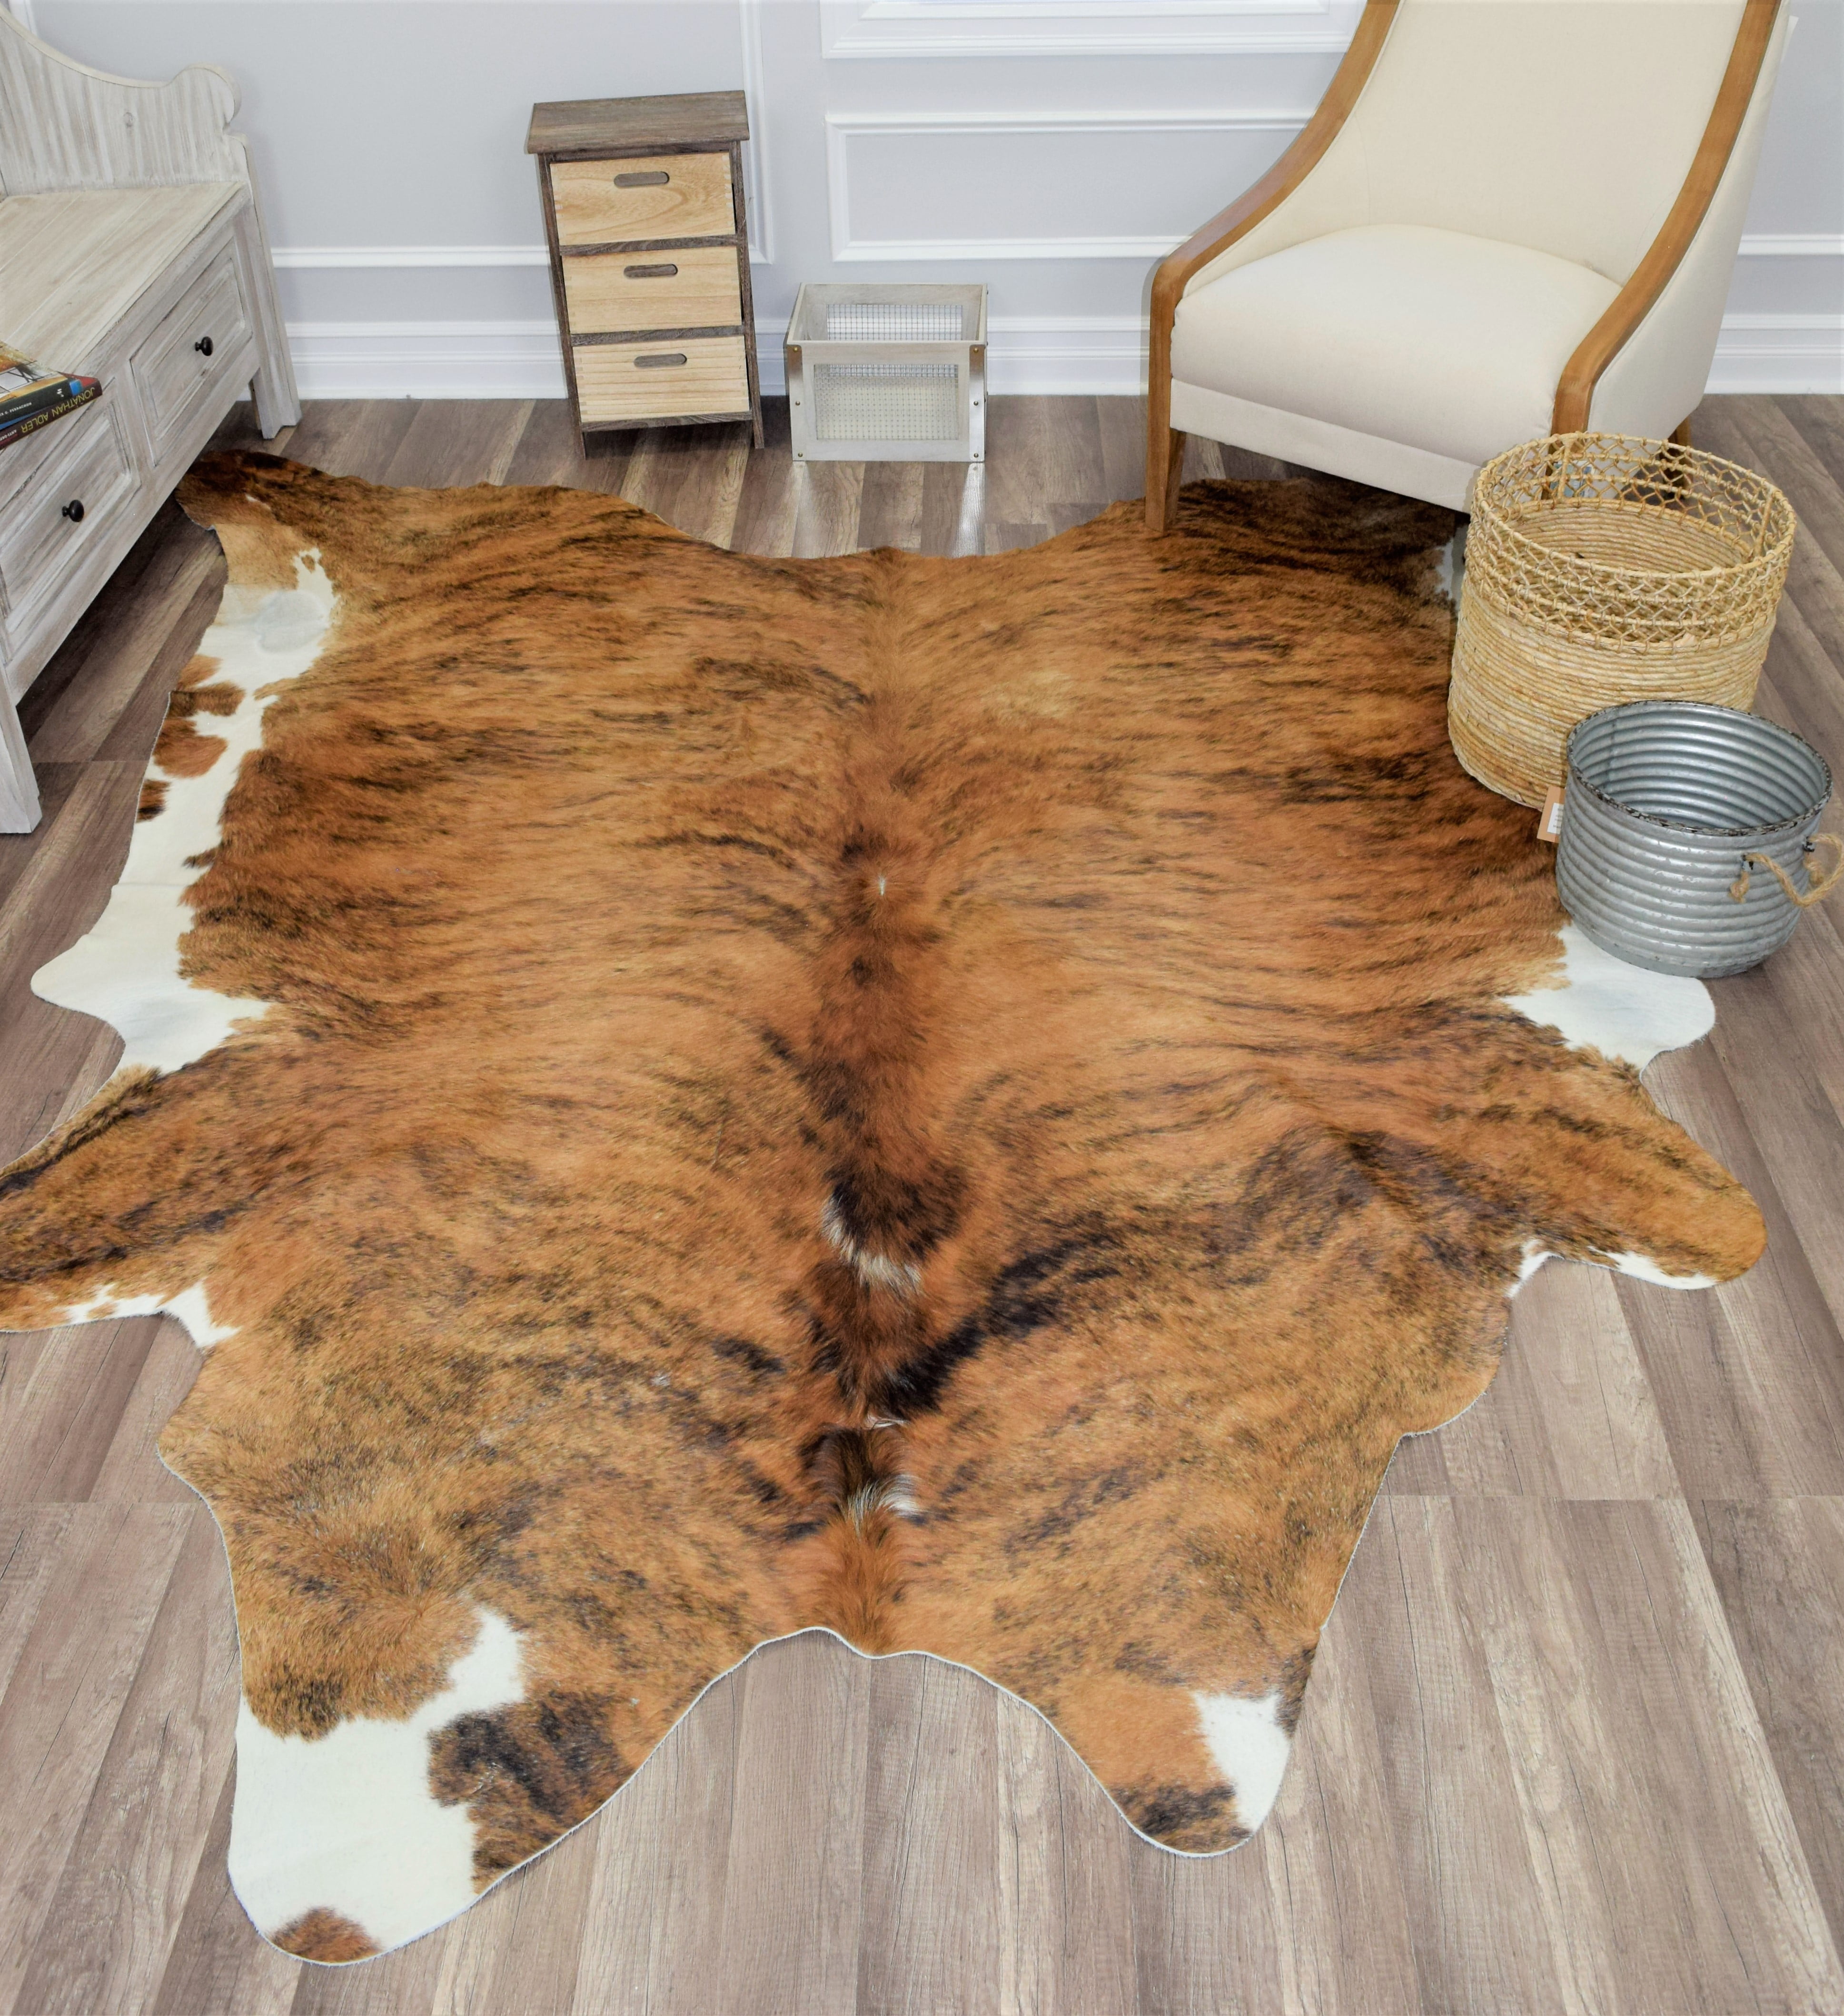 New COWHIDE RUG TRICOLOR 6'x8' Cow Skin Rug Leather Cow Hide Carpet 